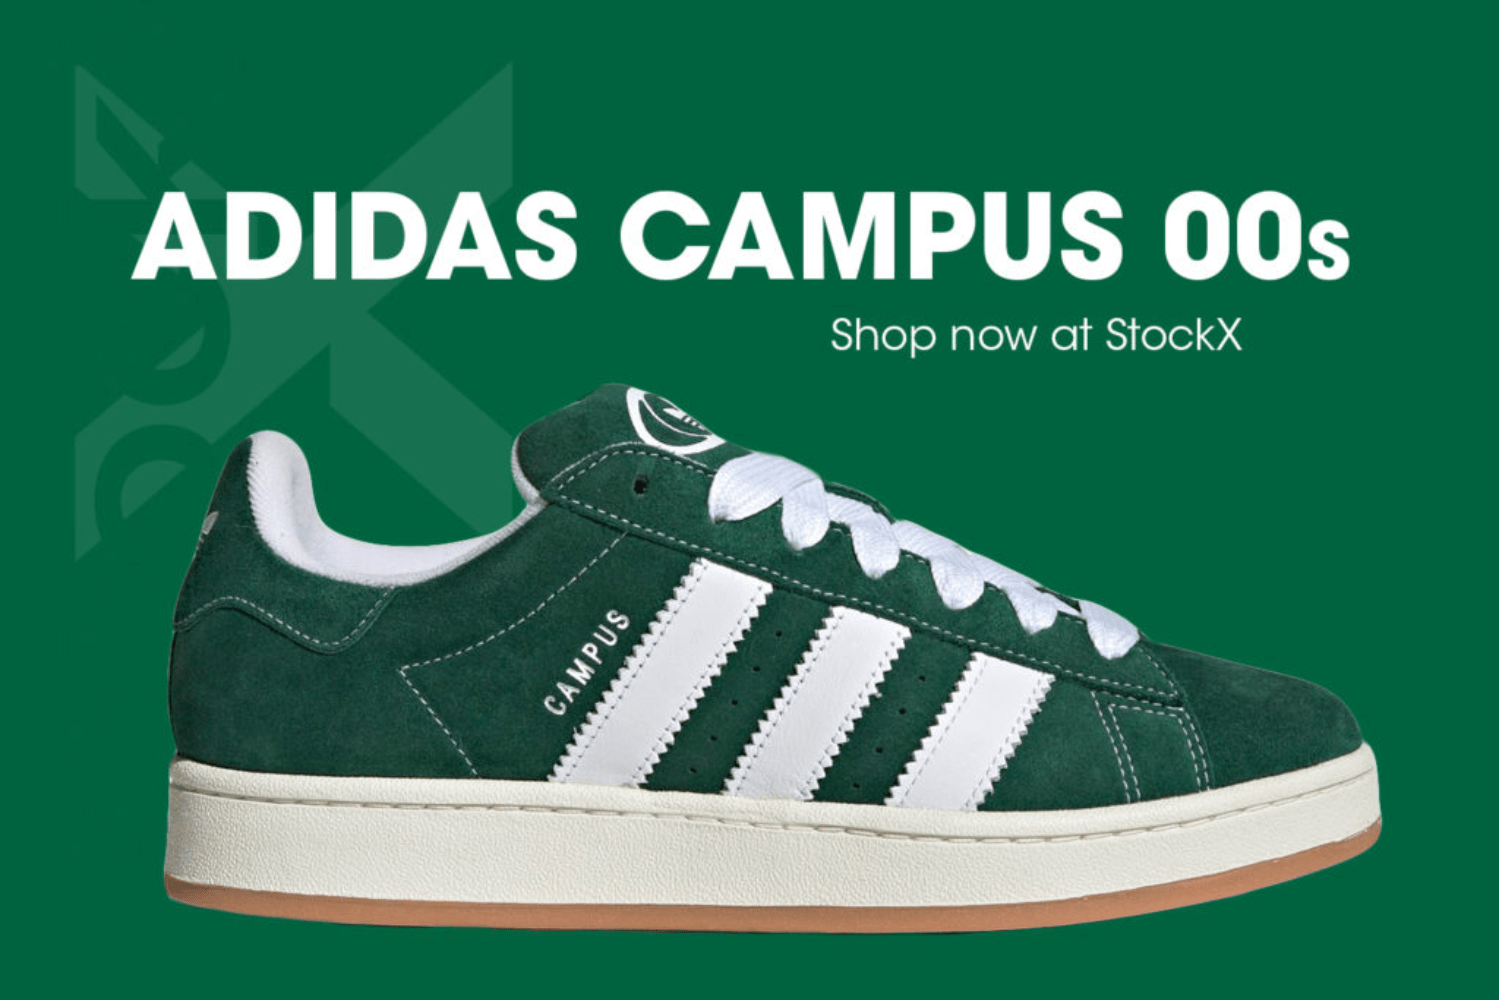 Top 10 adidas Campus 00 available at StockX